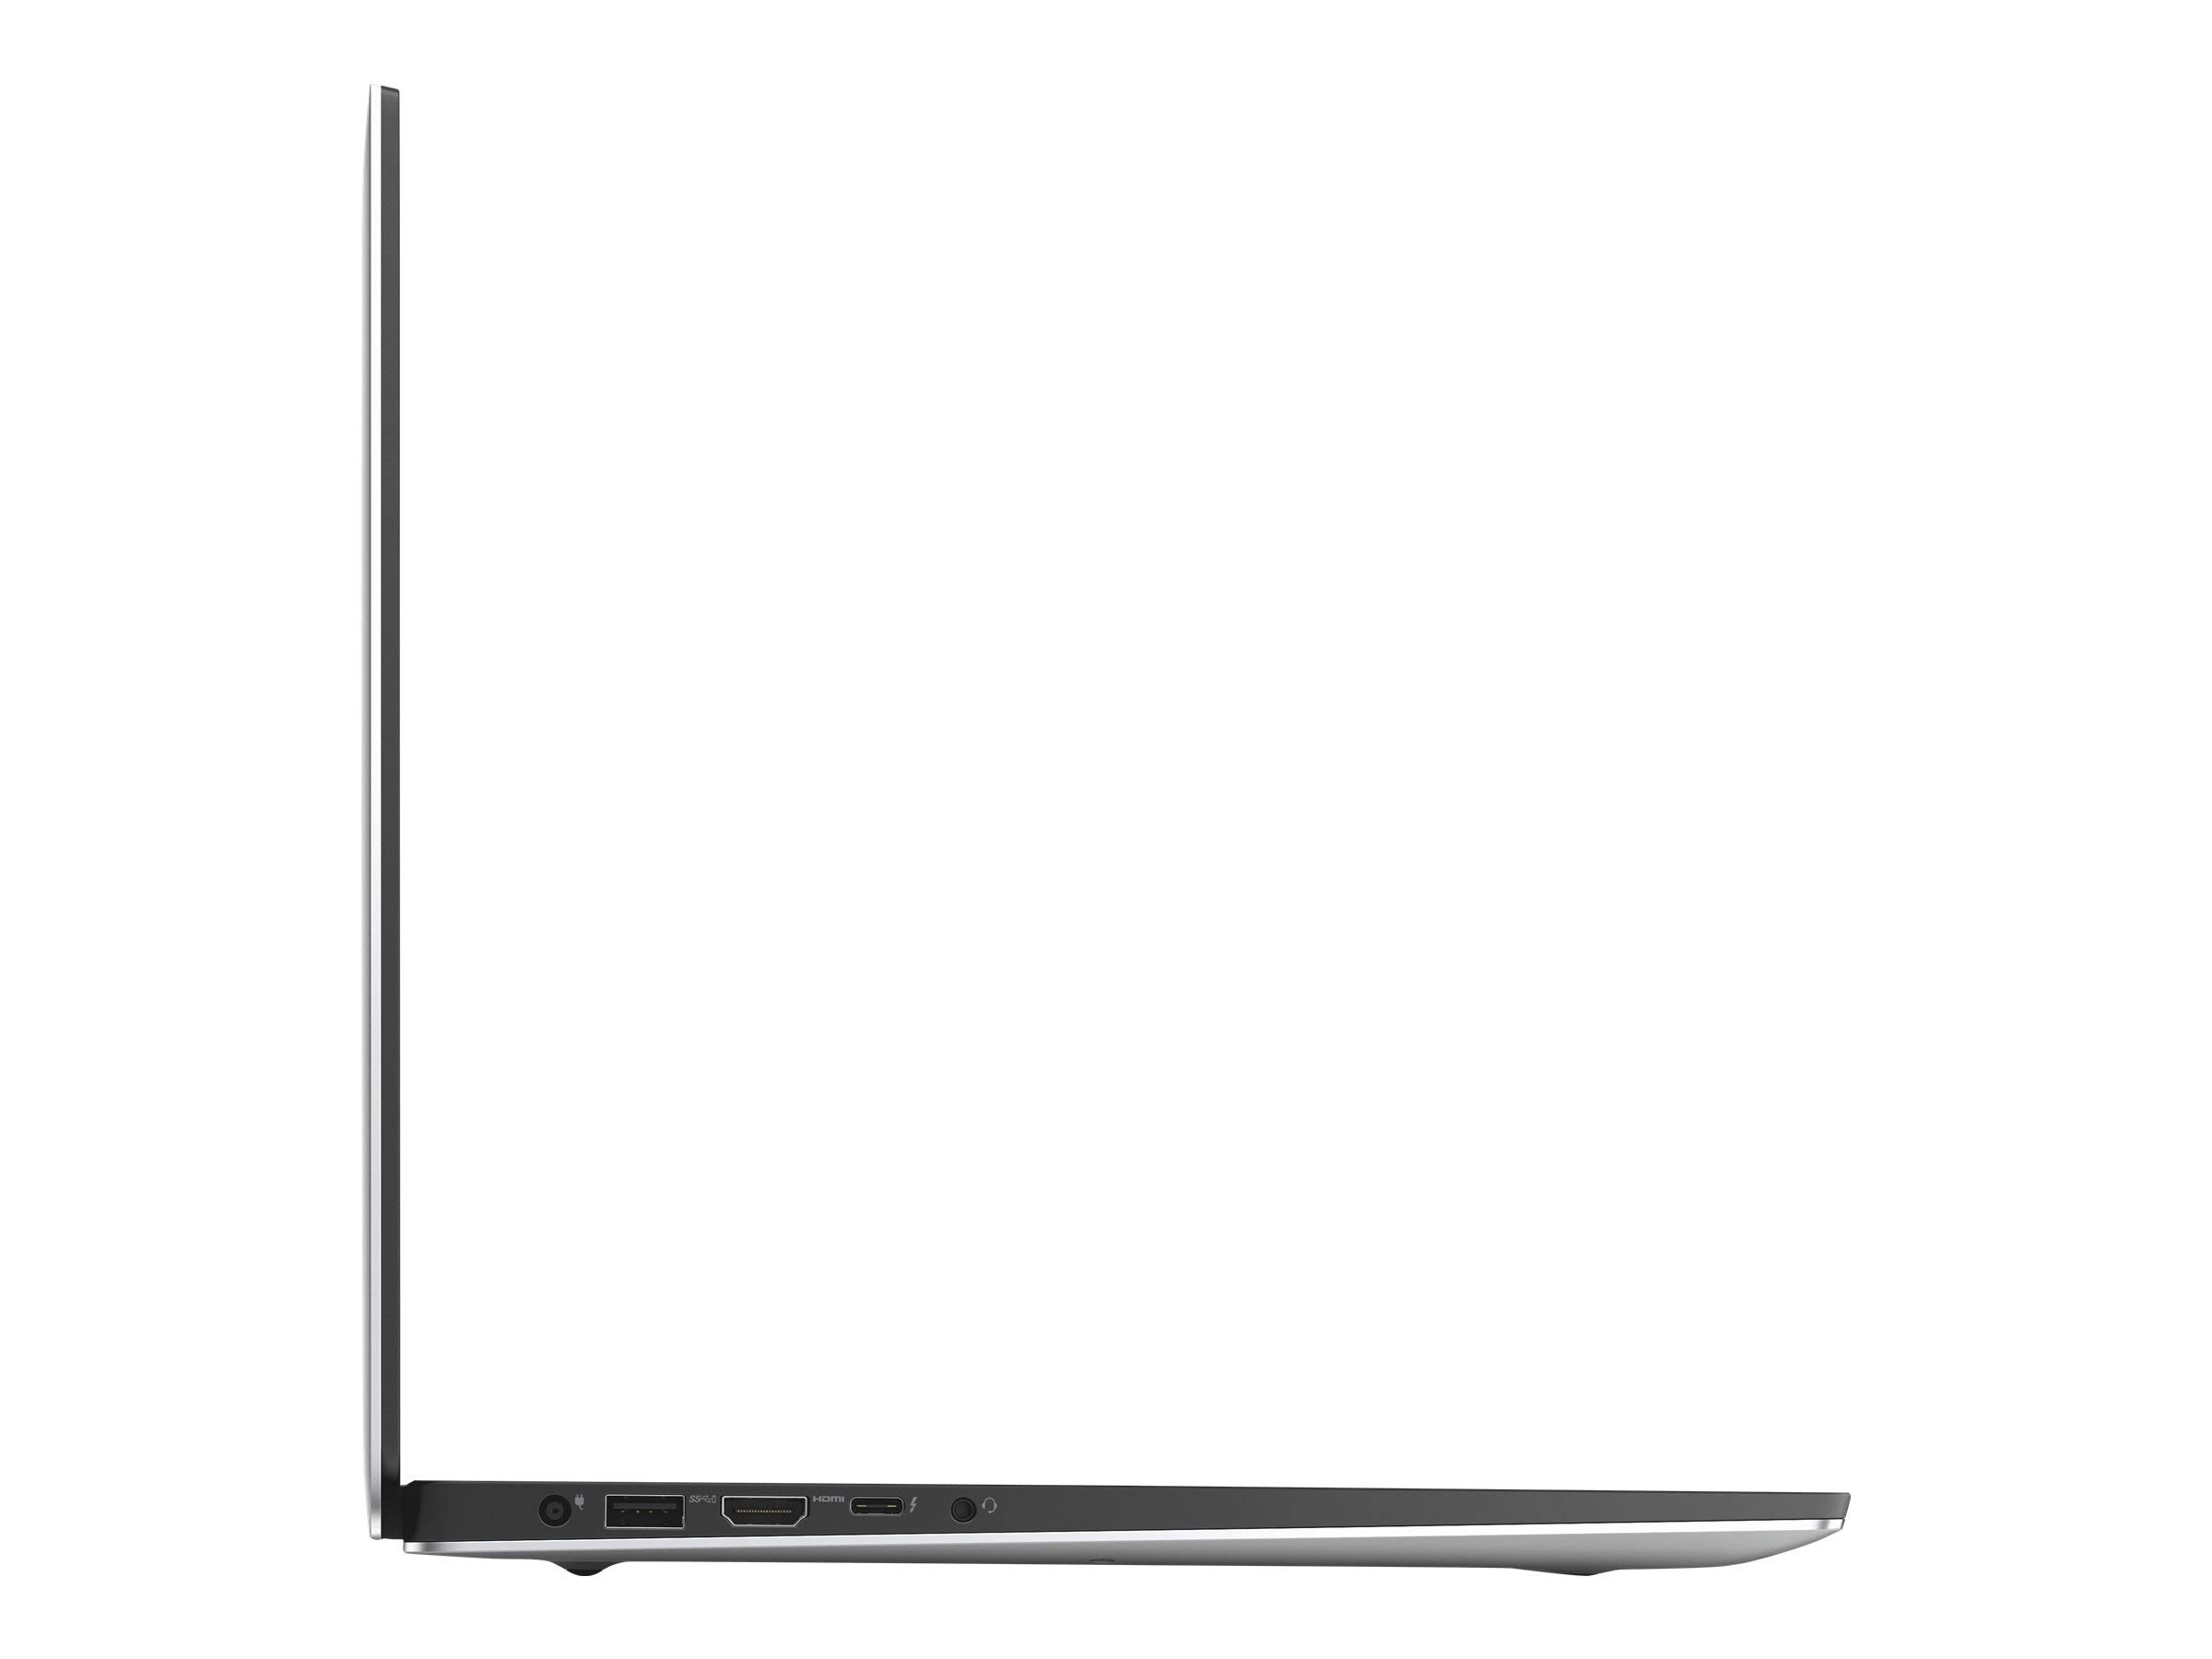 Dell XPS 15 7590, 15.6